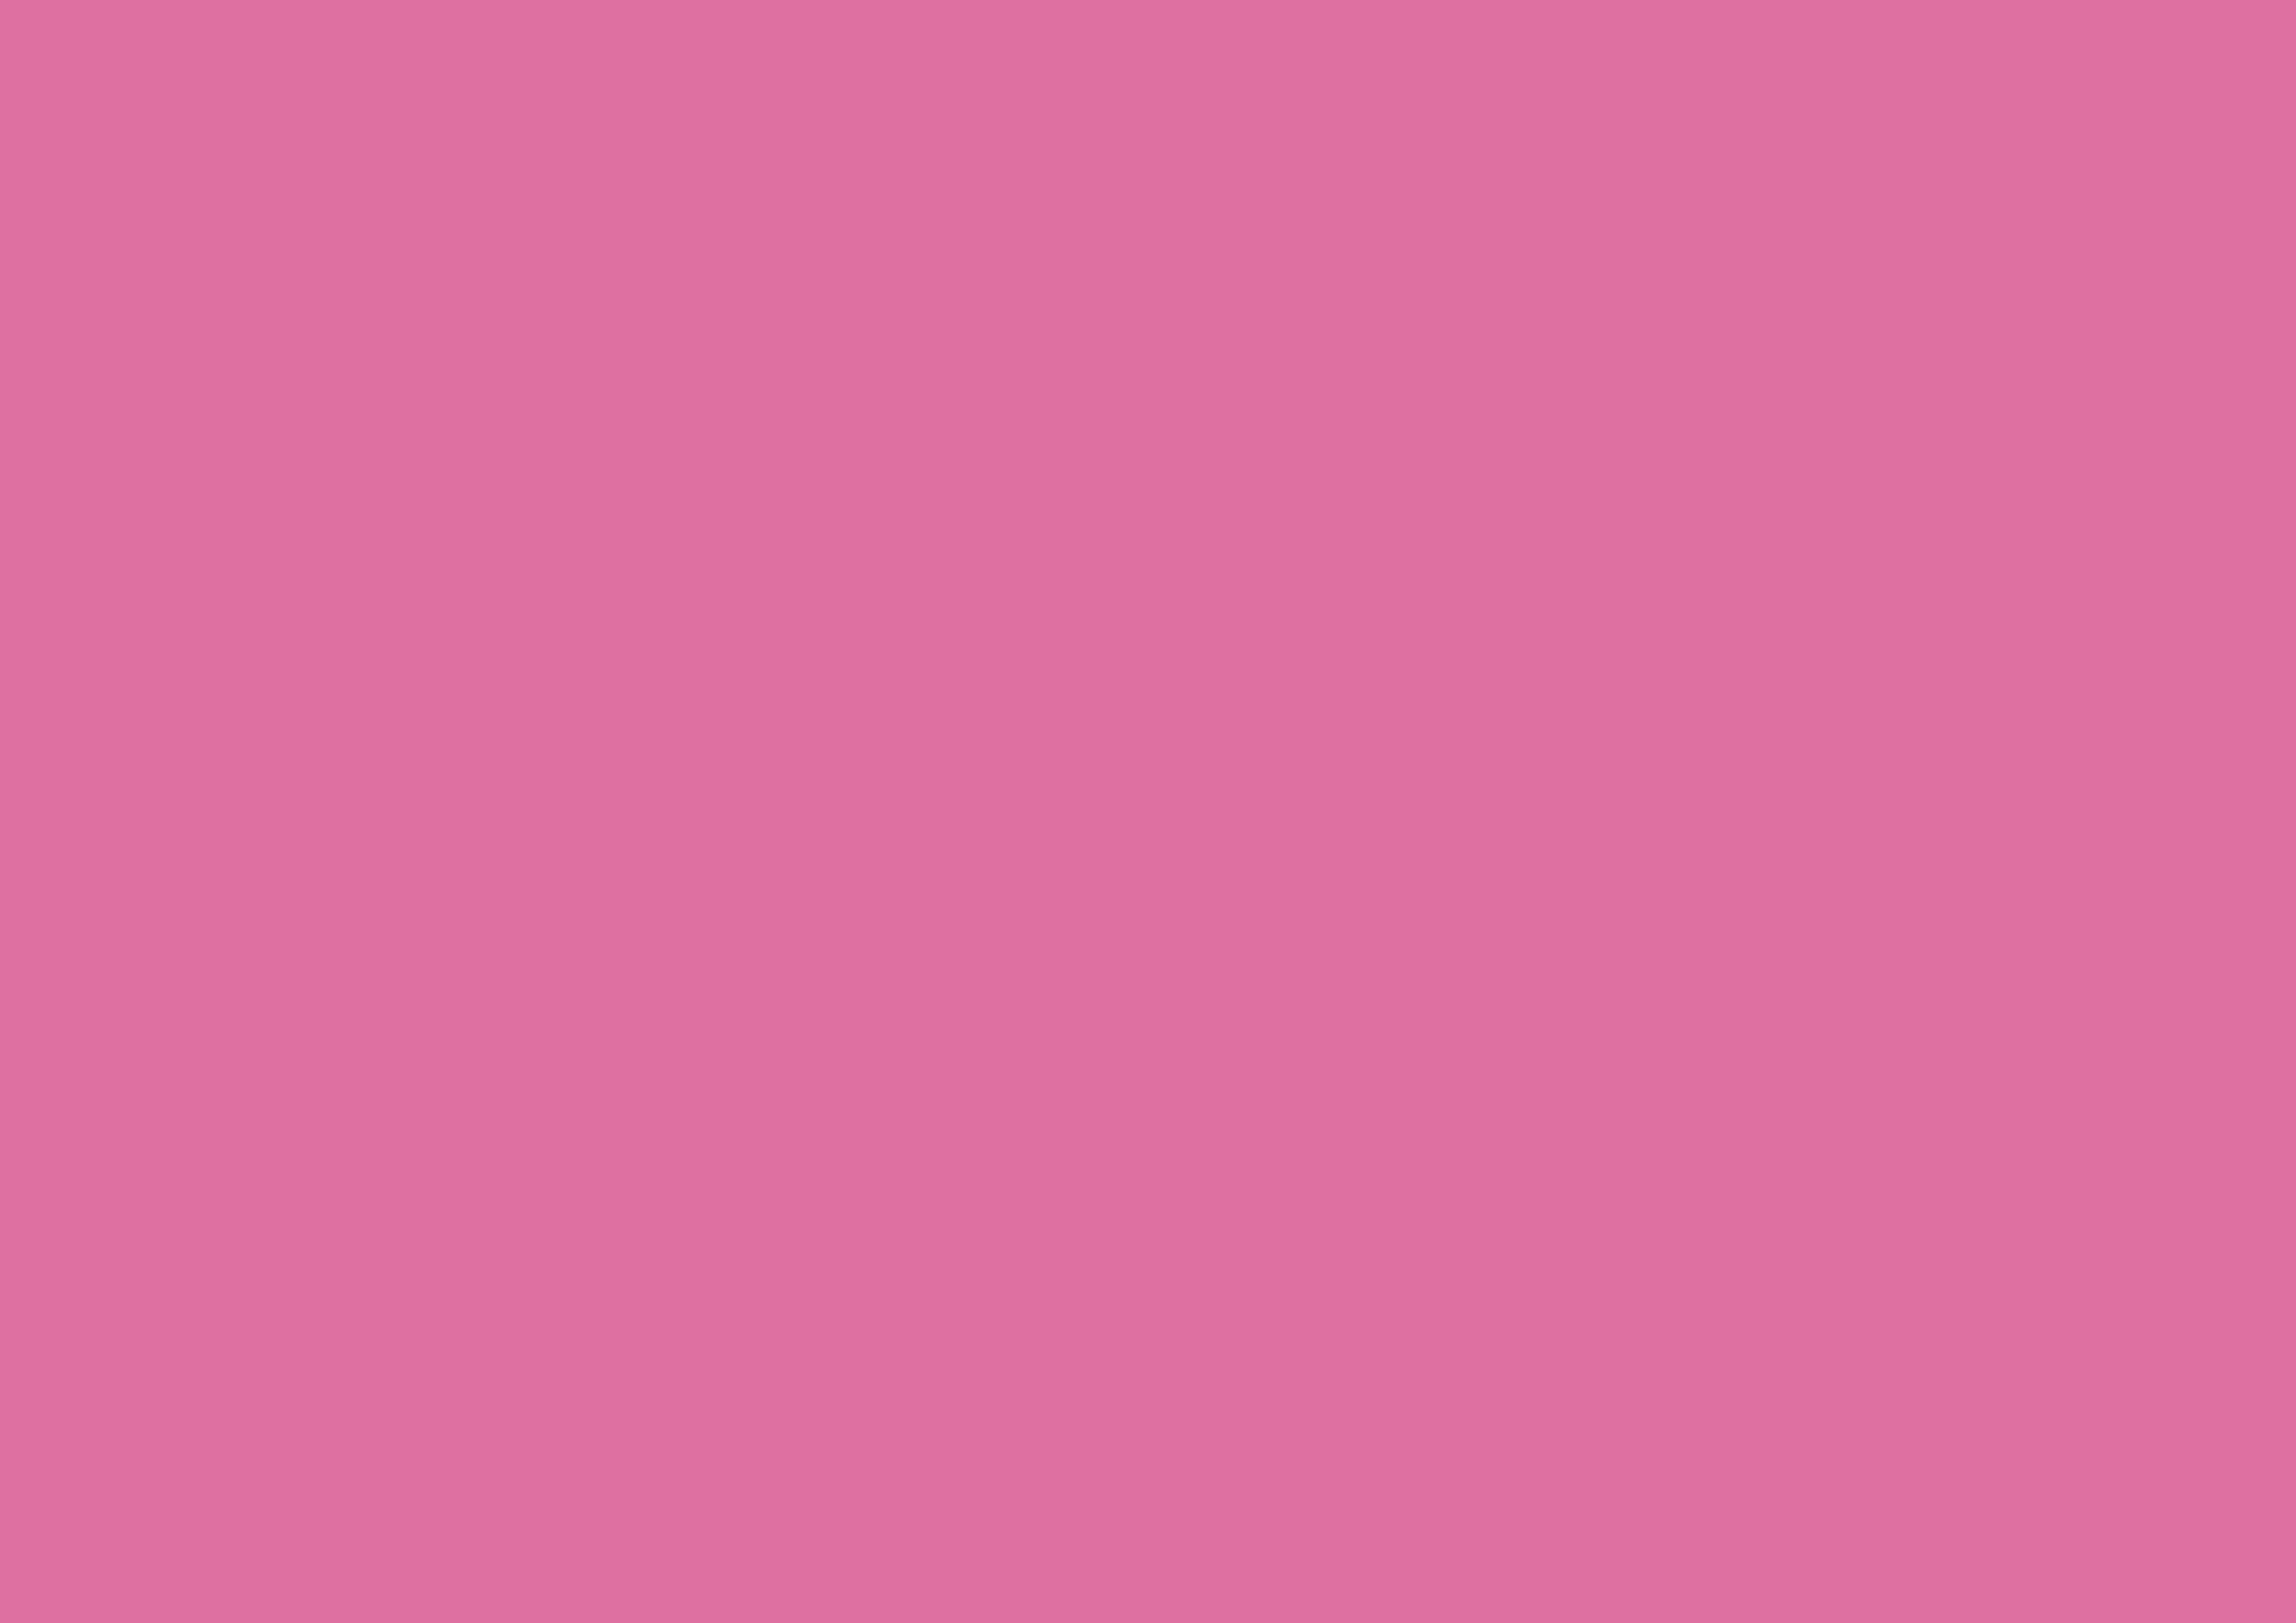 3508x2480 Thulian Pink Solid Color Background